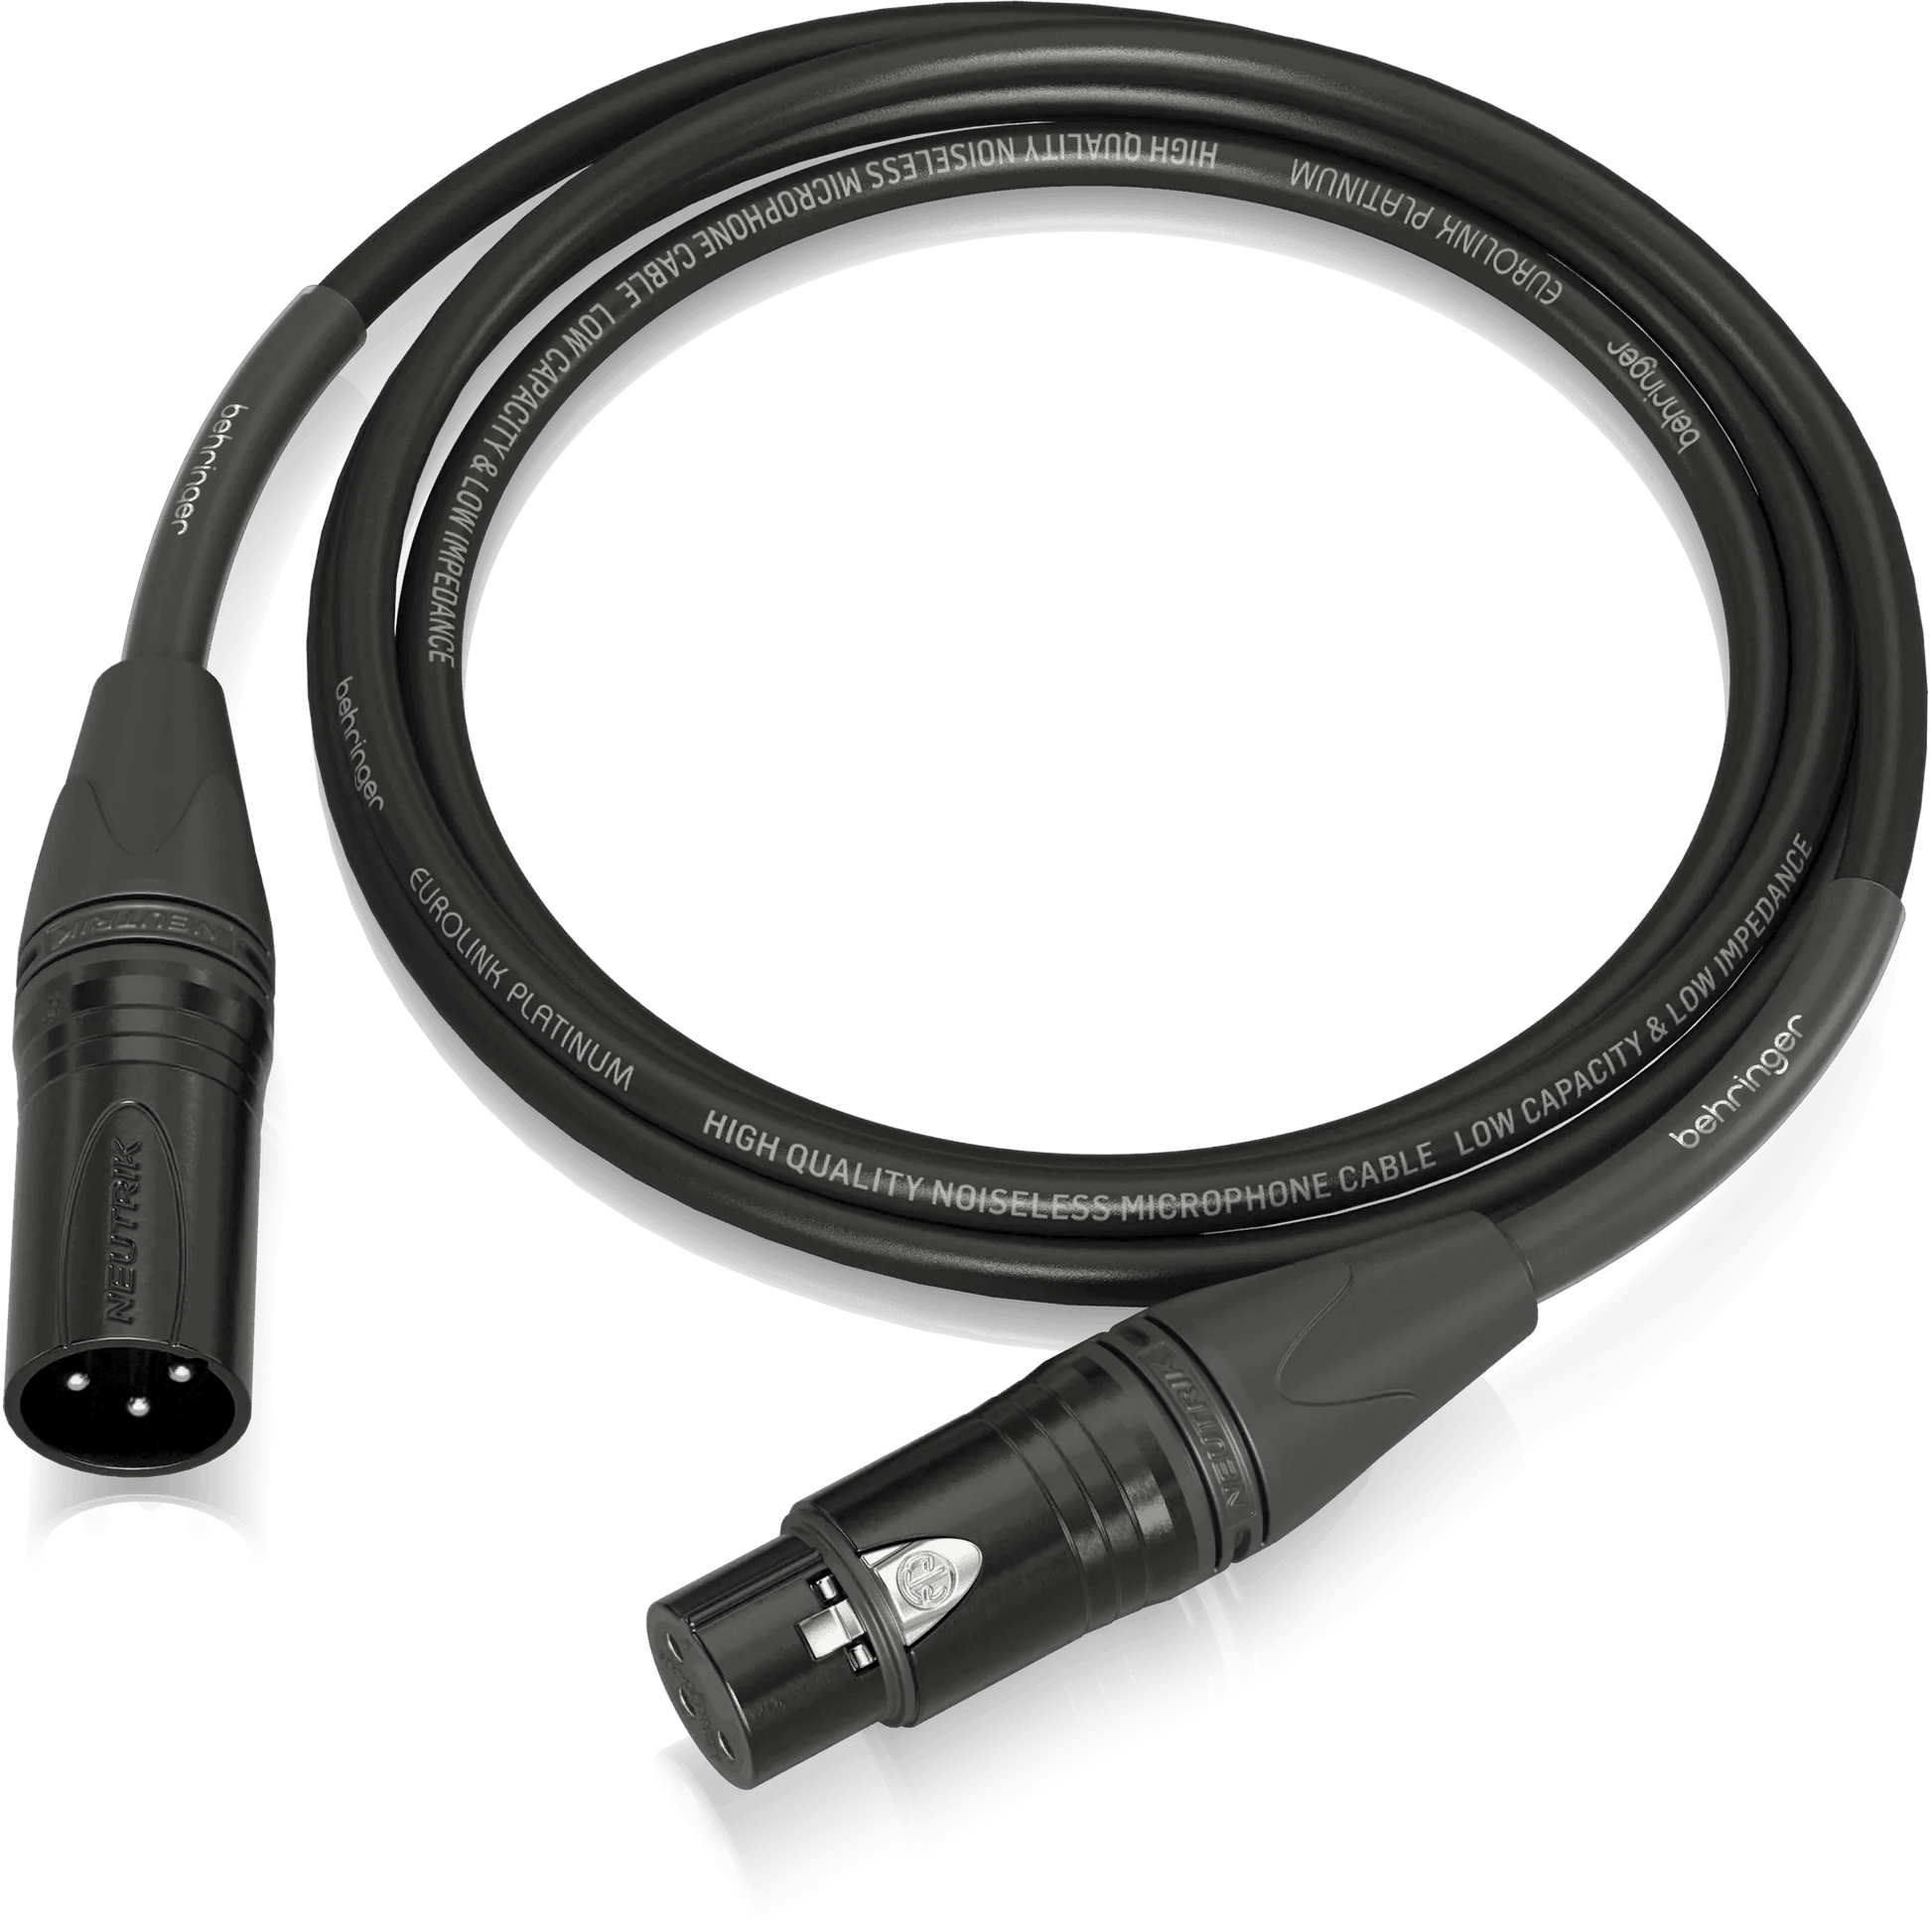 Behringer PMC-150 Platinum Performance 1.5 m (5 ft) Microphone Cable with XLR Connectors